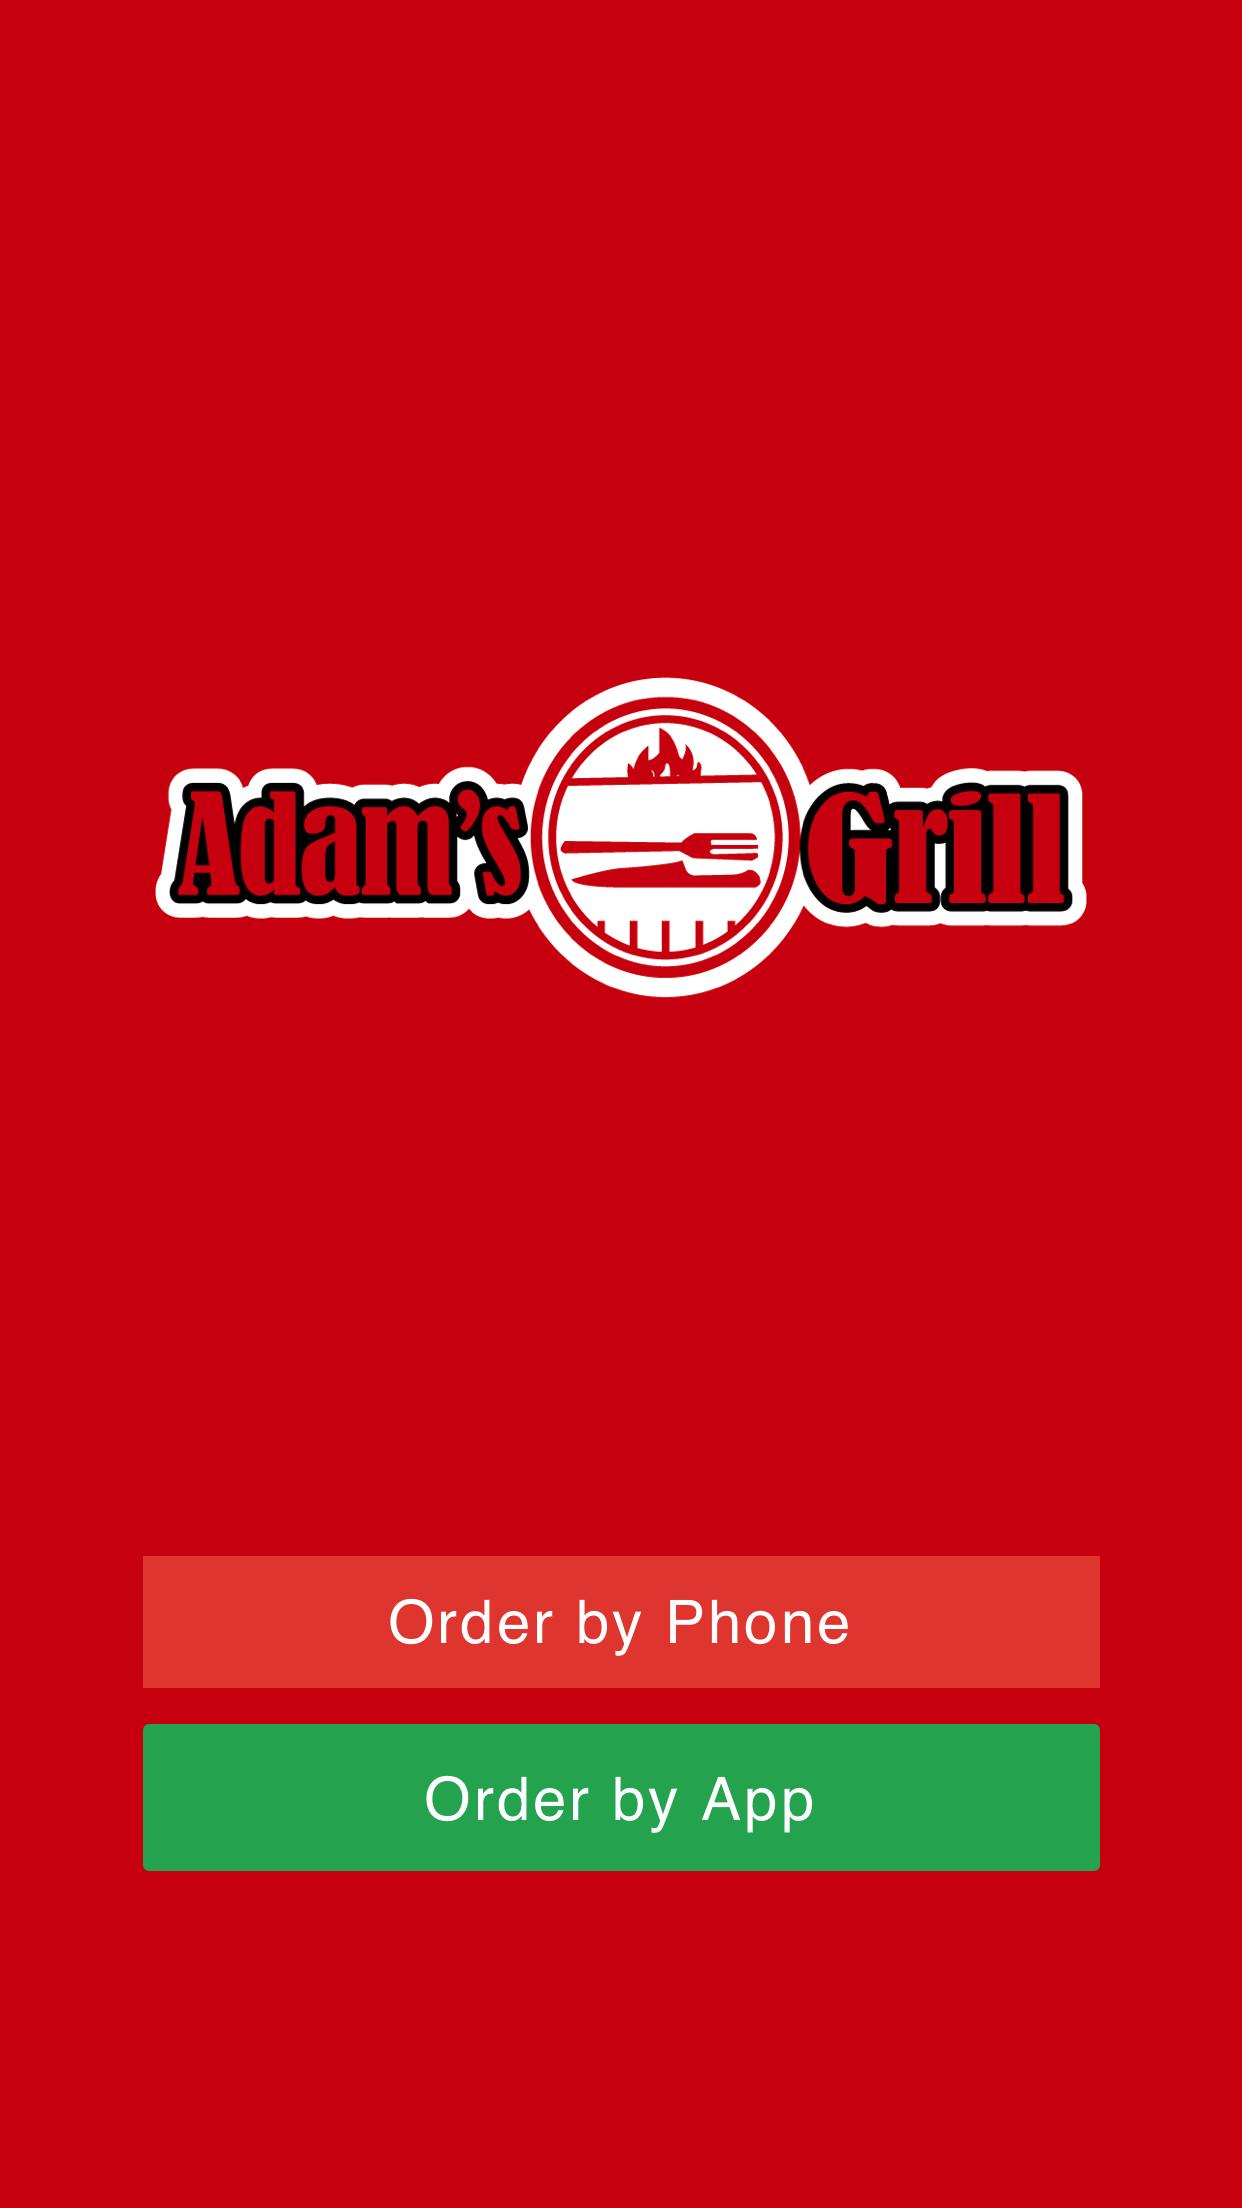 Adams Grill BD4 for Android - APK Download